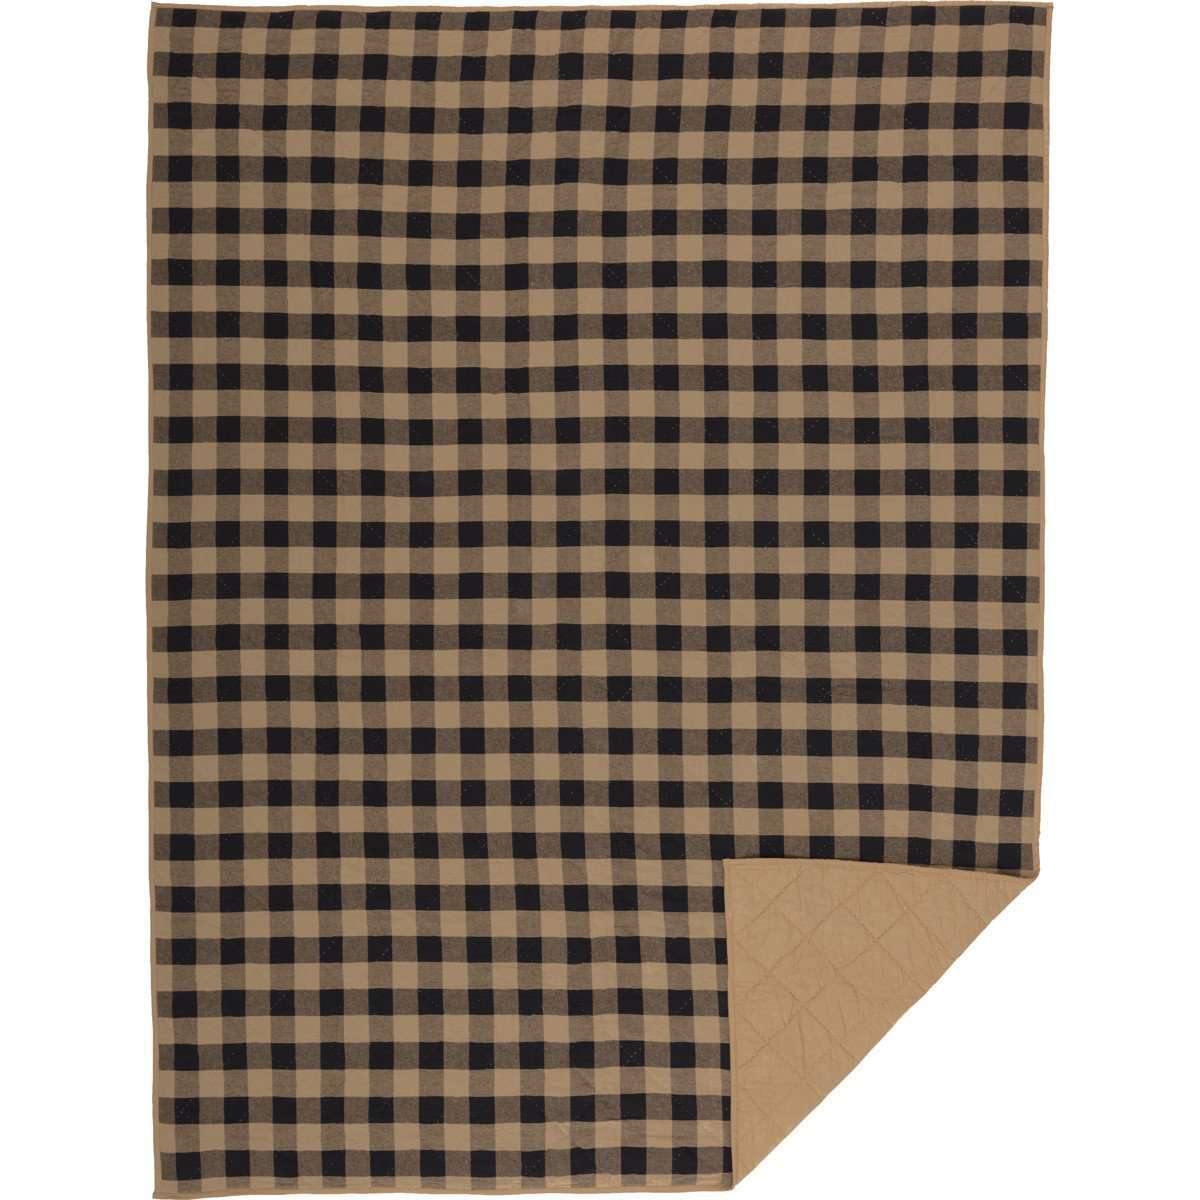 Black Check Quilt Coverlet VHC Brands twin